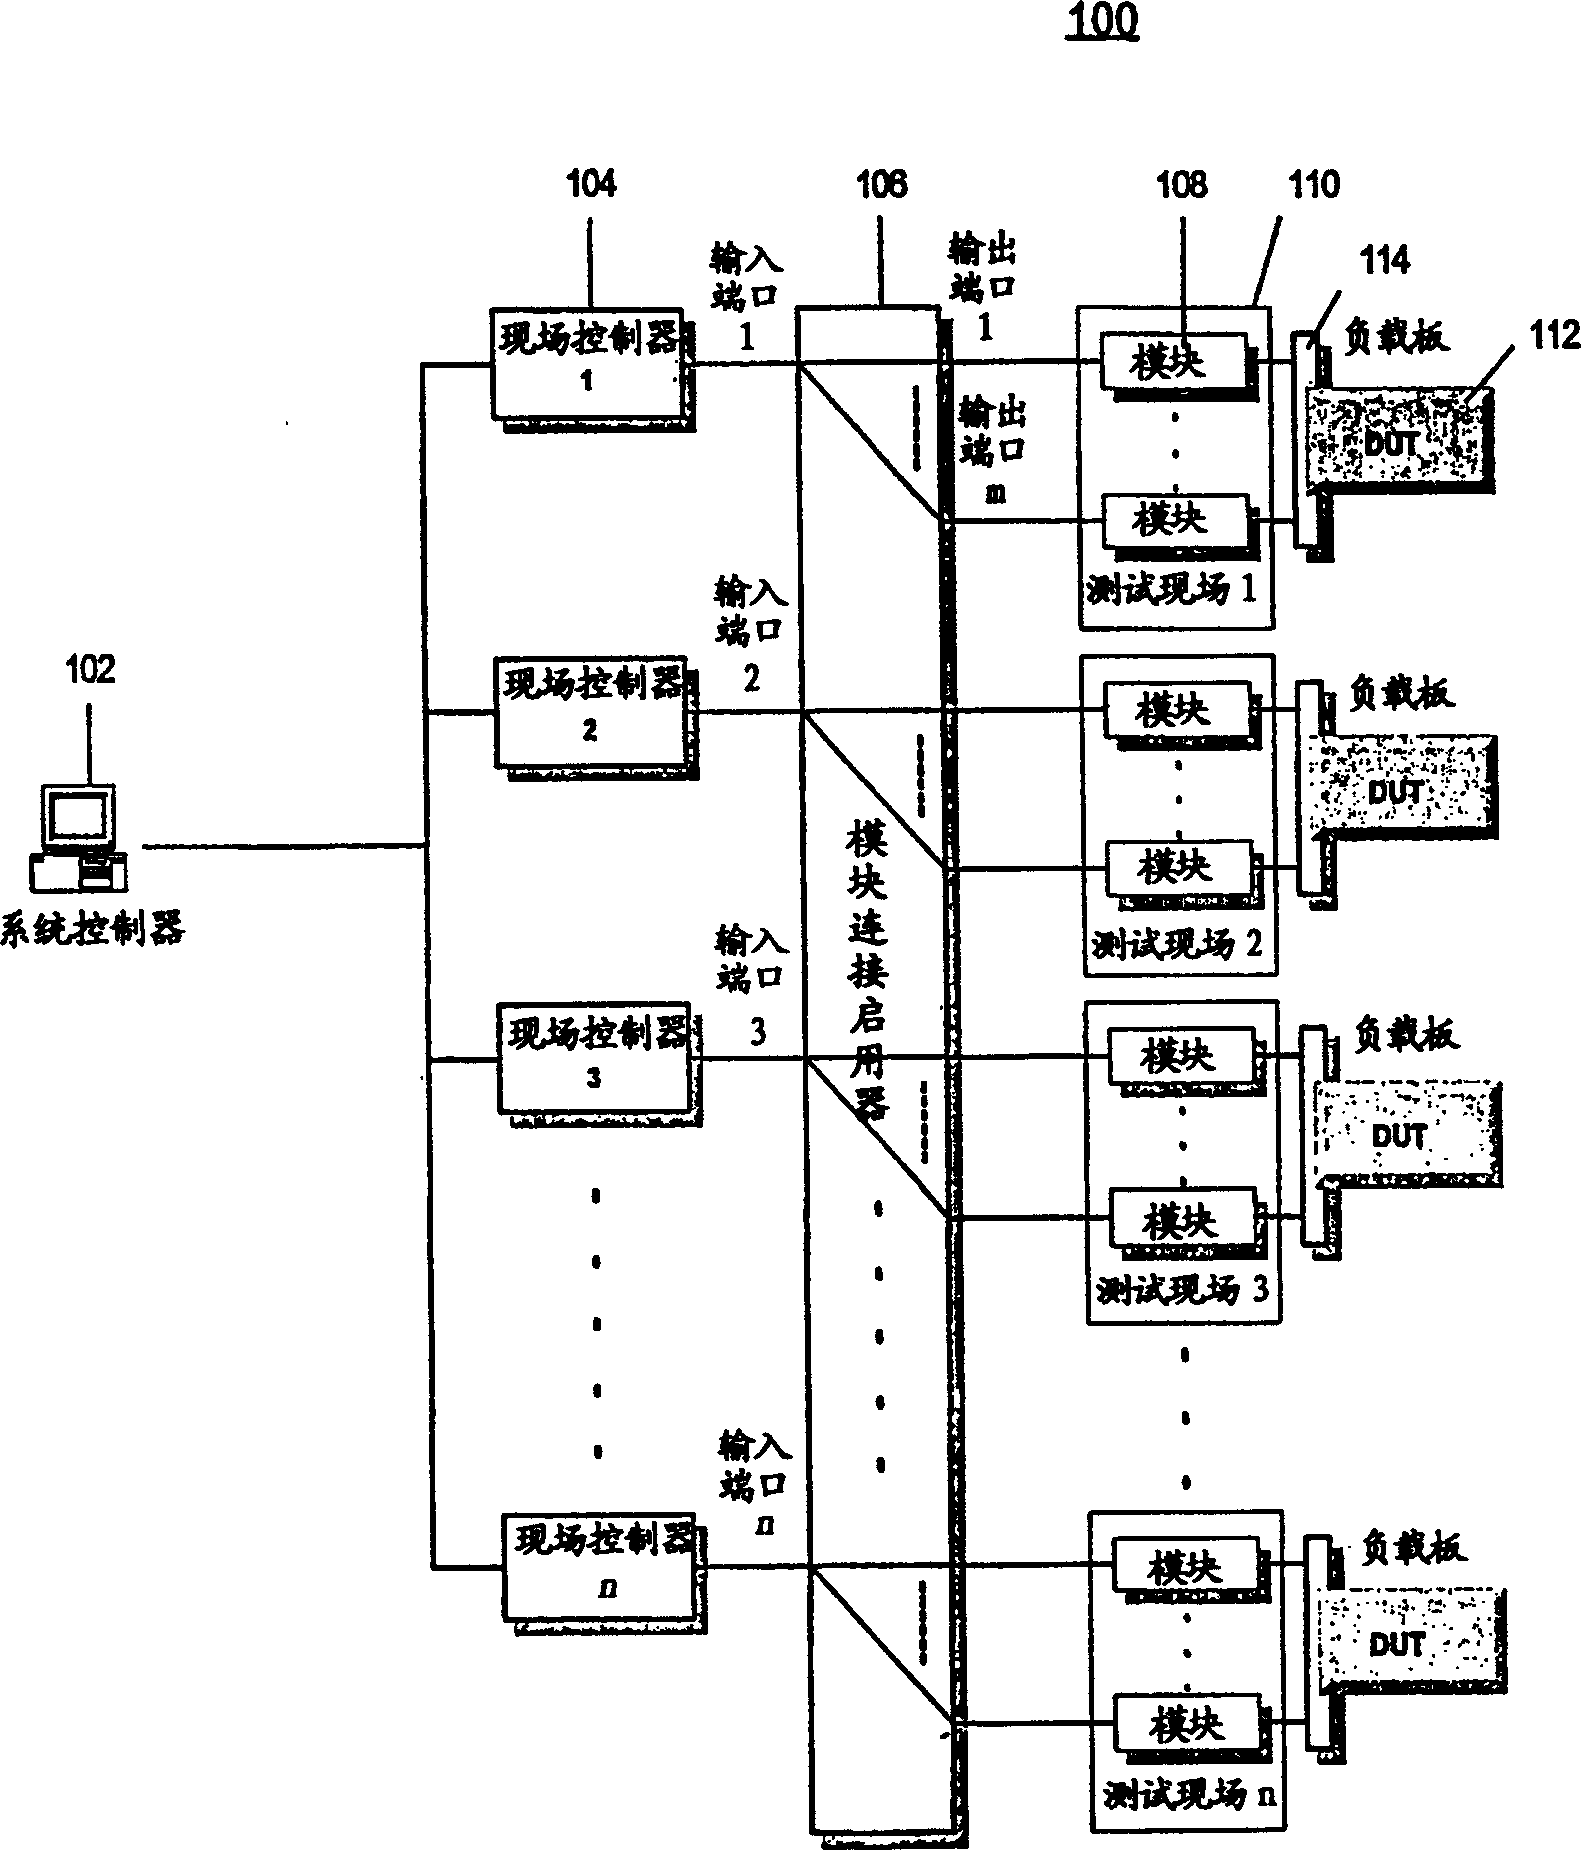 Method and apparatus for testing integrated circuits